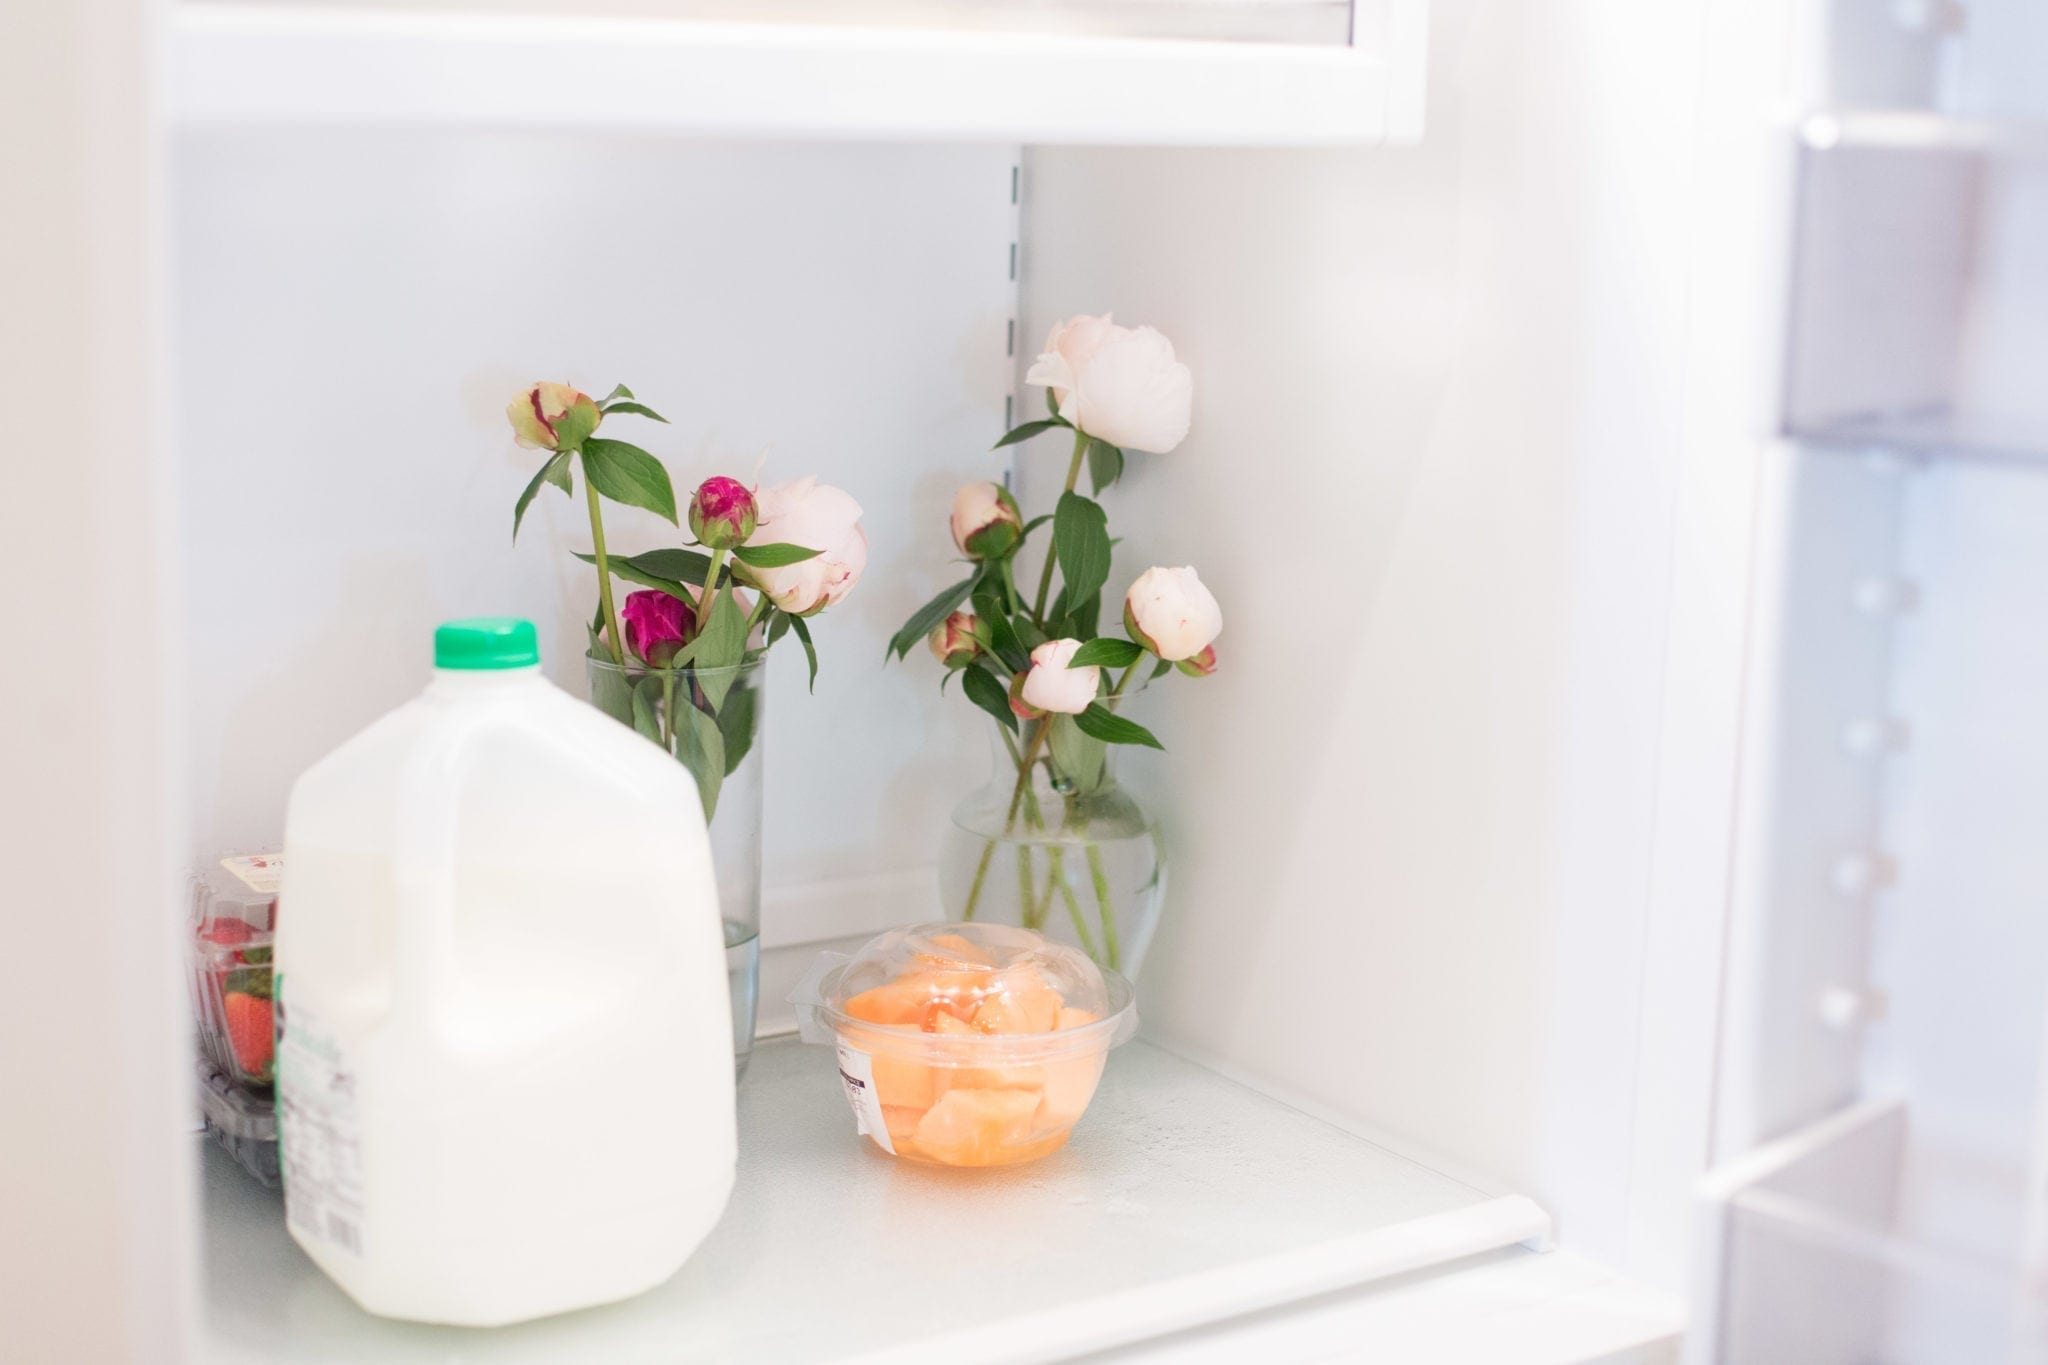 Keeping peonies in the refrigerator and tips to keep peonies alive longer.